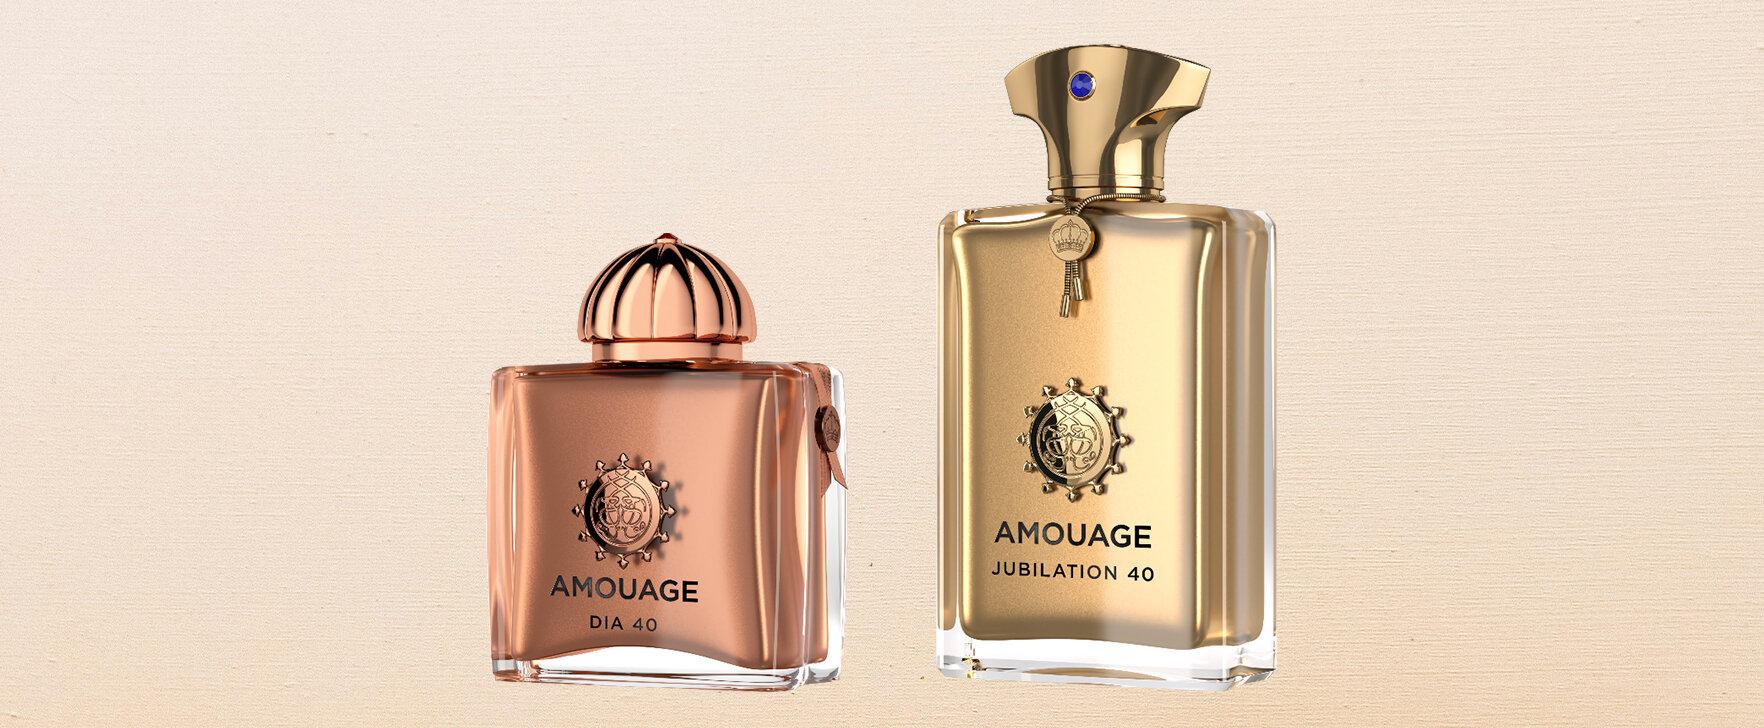 Dia 40 and Jubilation 40: The New Extraits de Parfum From Amouage